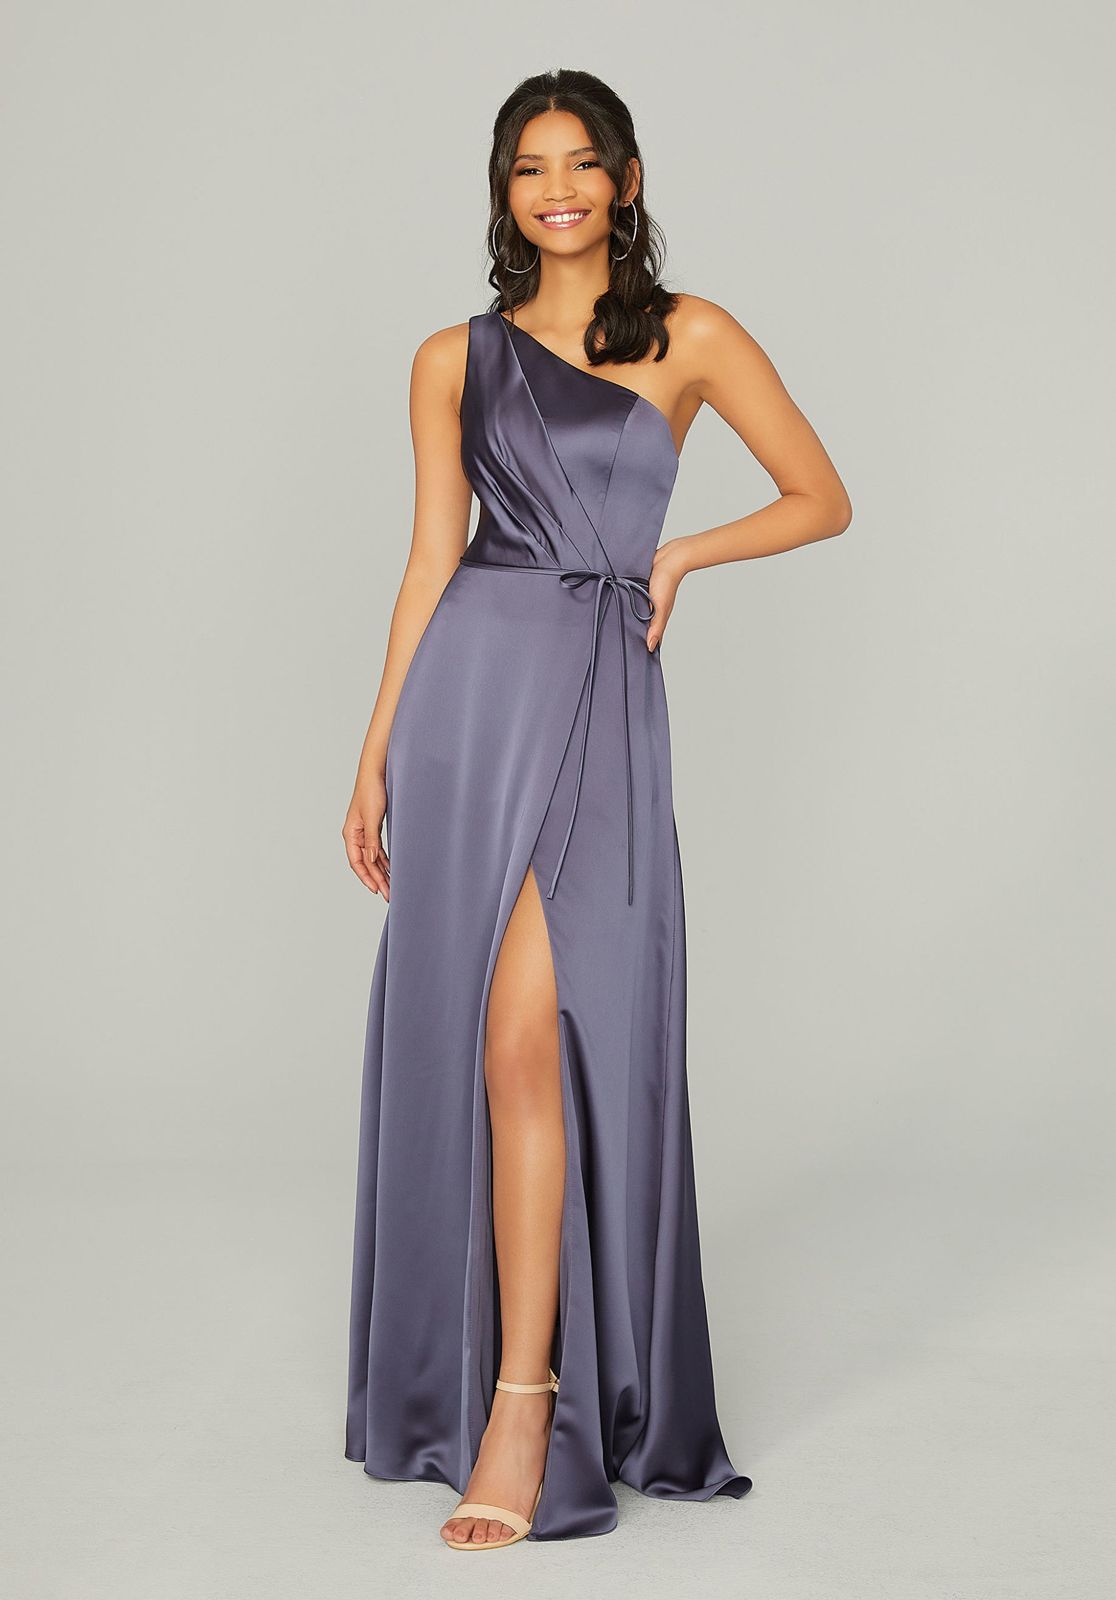 Strapless Bustier A-line Satin Bridesmaid Dress With Front Slit In